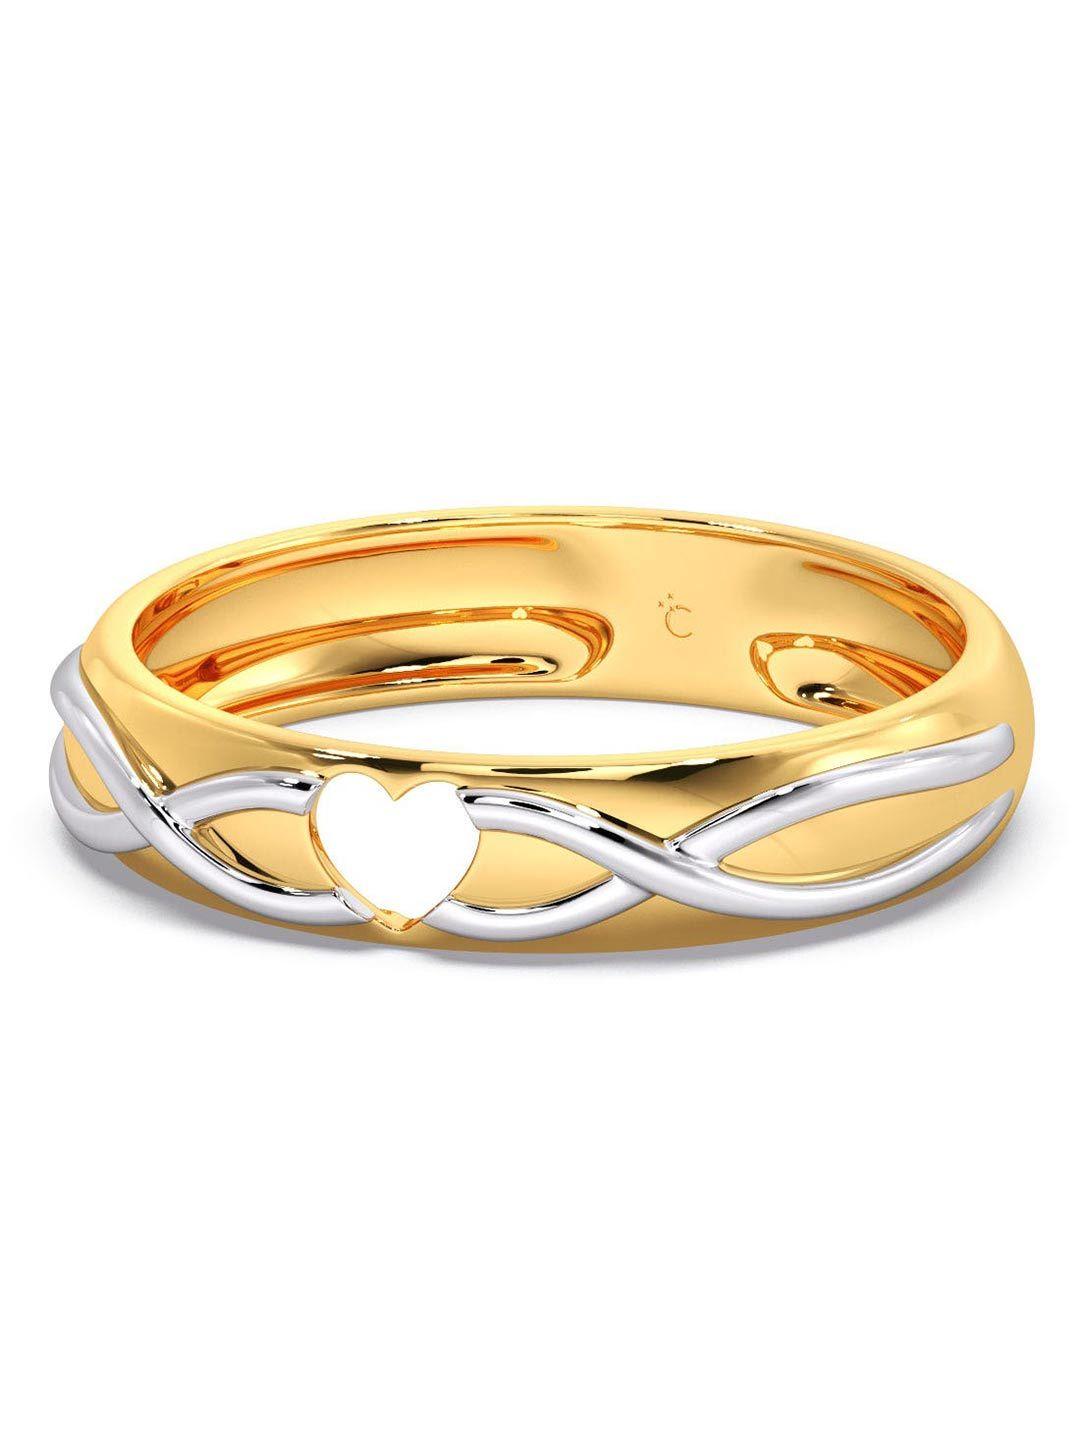 candere a kalyan jewellers company 14kt gold heart band ring-2.6gm